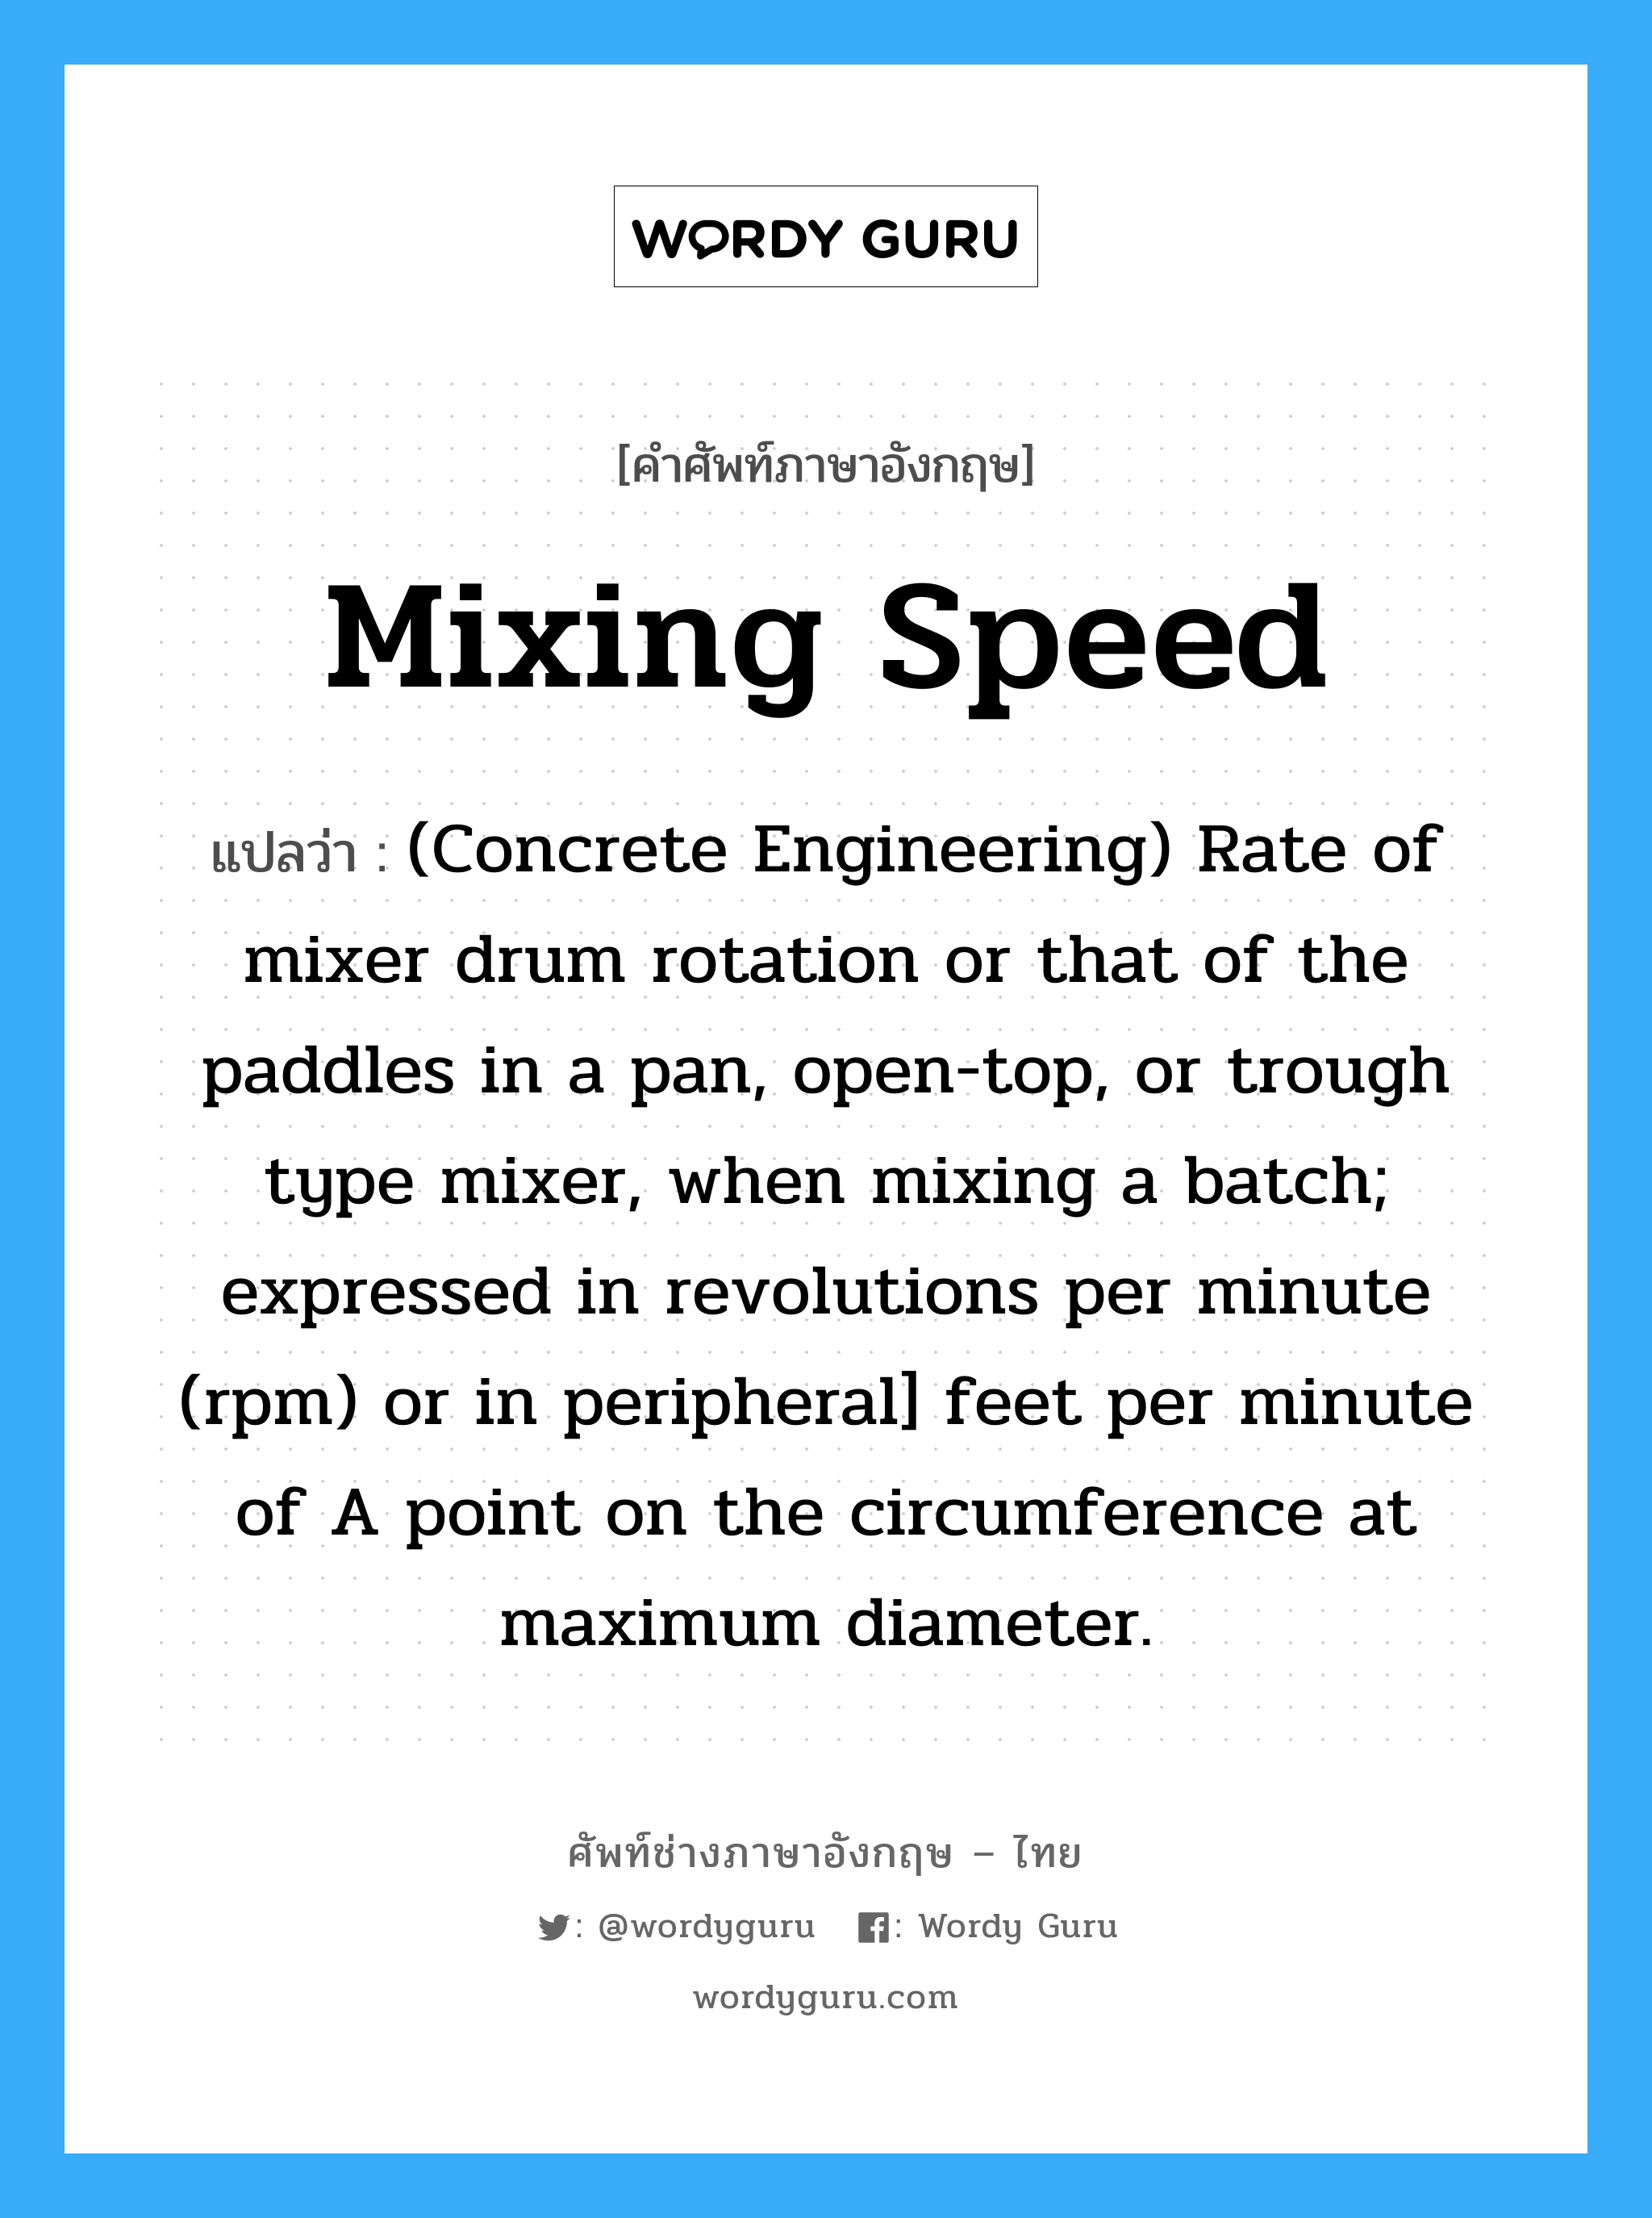 (Concrete Engineering) Rate of mixer drum rotation or that of the paddles in a pan, open-top, or trough type mixer, when mixing a batch; expressed in revolutions per minute (rpm) or in peripheral] feet per minute of A point on the circumference at maximum diameter. ภาษาอังกฤษ?, คำศัพท์ช่างภาษาอังกฤษ - ไทย (Concrete Engineering) Rate of mixer drum rotation or that of the paddles in a pan, open-top, or trough type mixer, when mixing a batch; expressed in revolutions per minute (rpm) or in peripheral] feet per minute of A point on the circumference at maximum diameter. คำศัพท์ภาษาอังกฤษ (Concrete Engineering) Rate of mixer drum rotation or that of the paddles in a pan, open-top, or trough type mixer, when mixing a batch; expressed in revolutions per minute (rpm) or in peripheral] feet per minute of A point on the circumference at maximum diameter. แปลว่า Mixing Speed